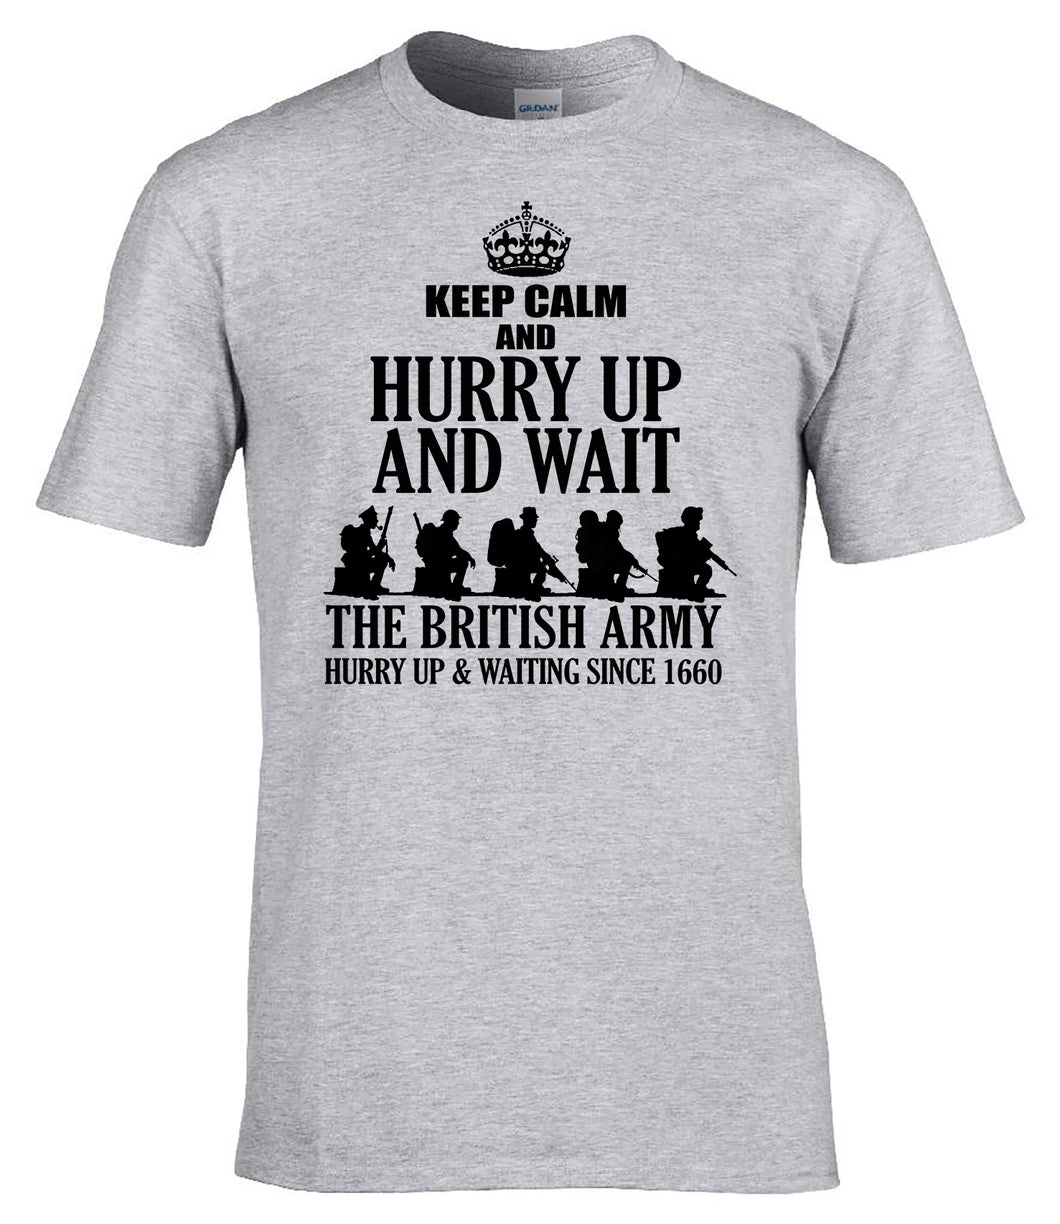 Military Humor - Hurry Up And Wait